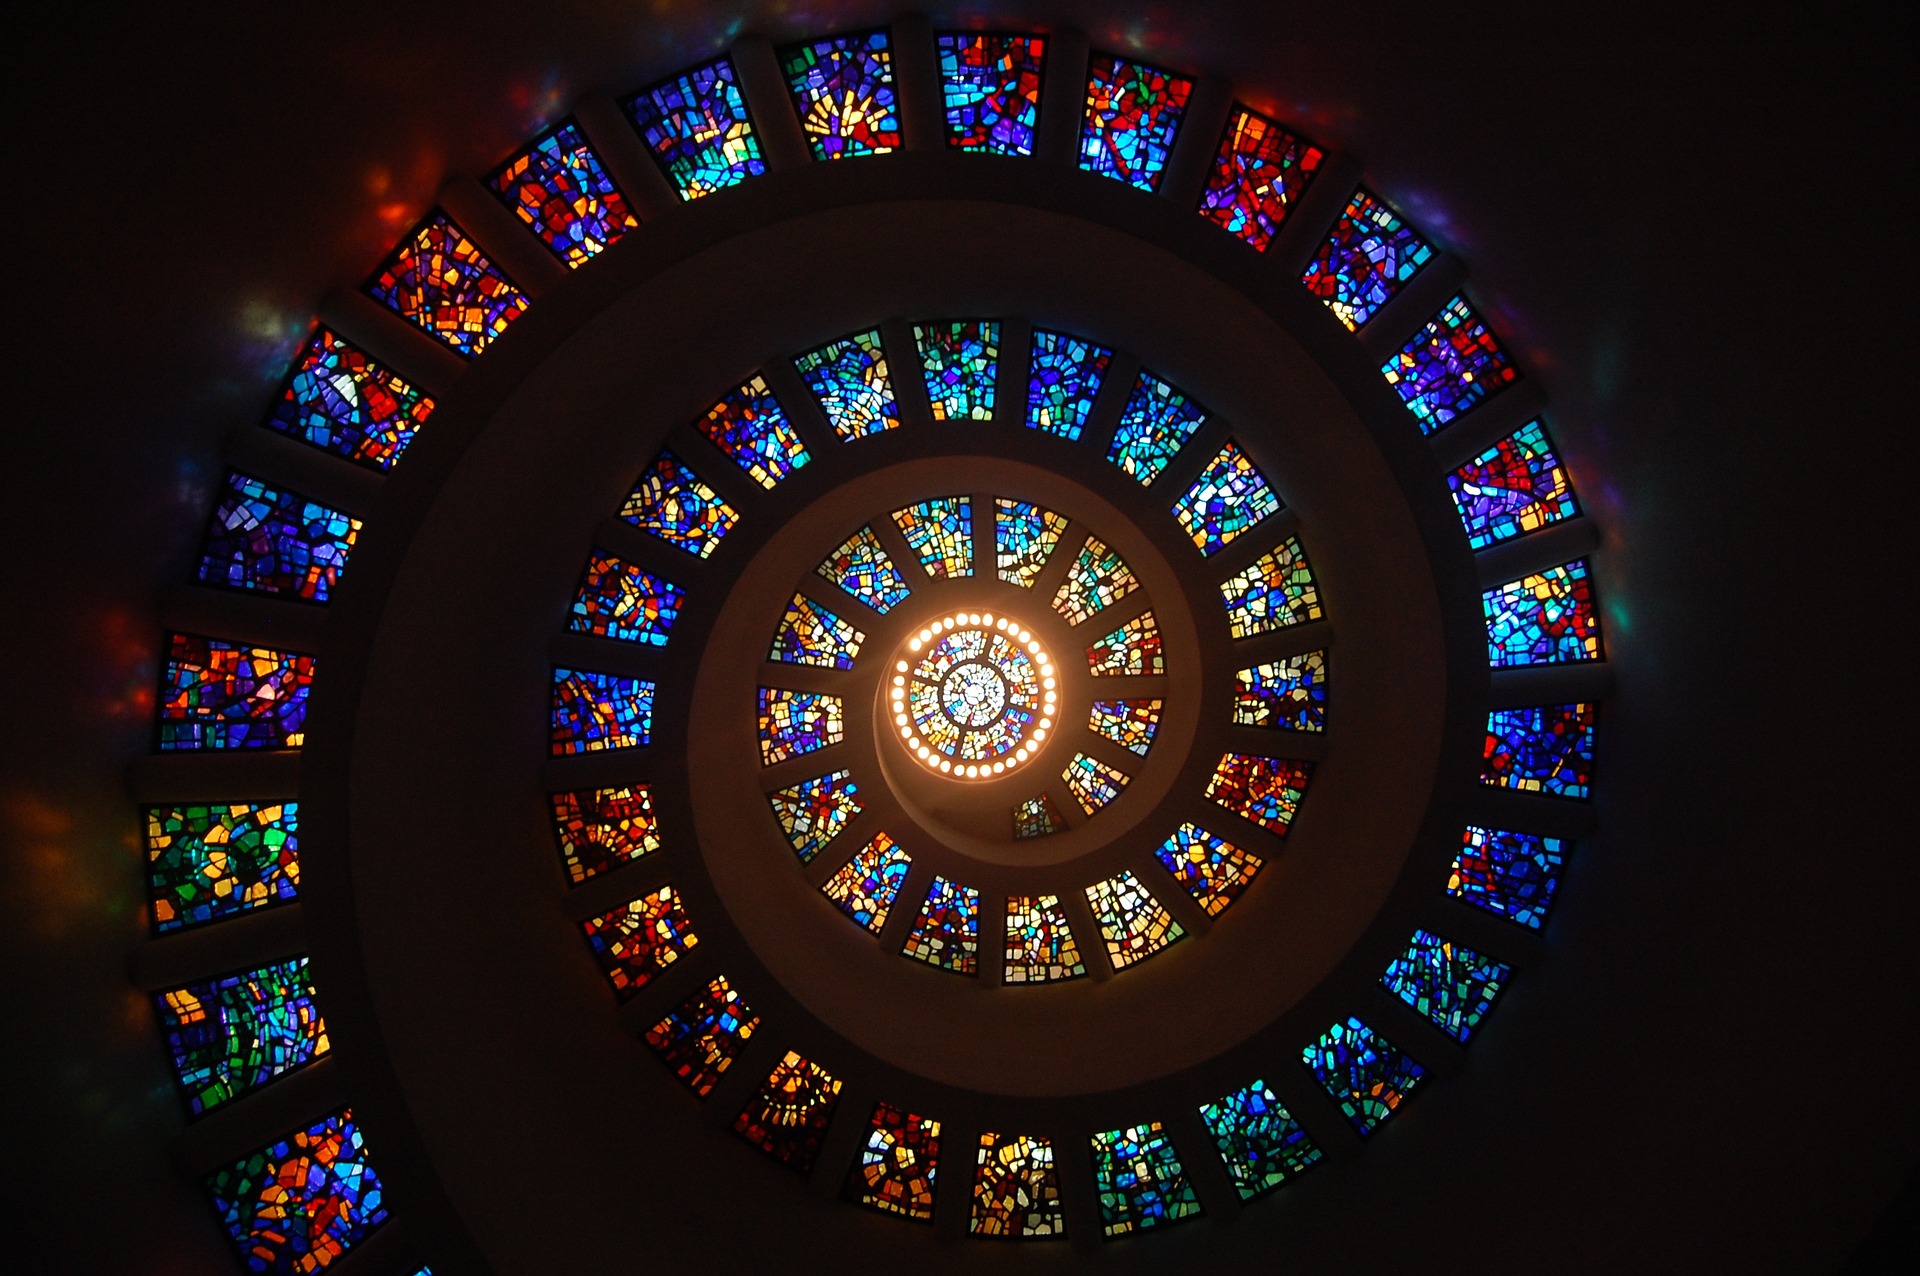 stained-glass-1181864_1920-jpg.935202